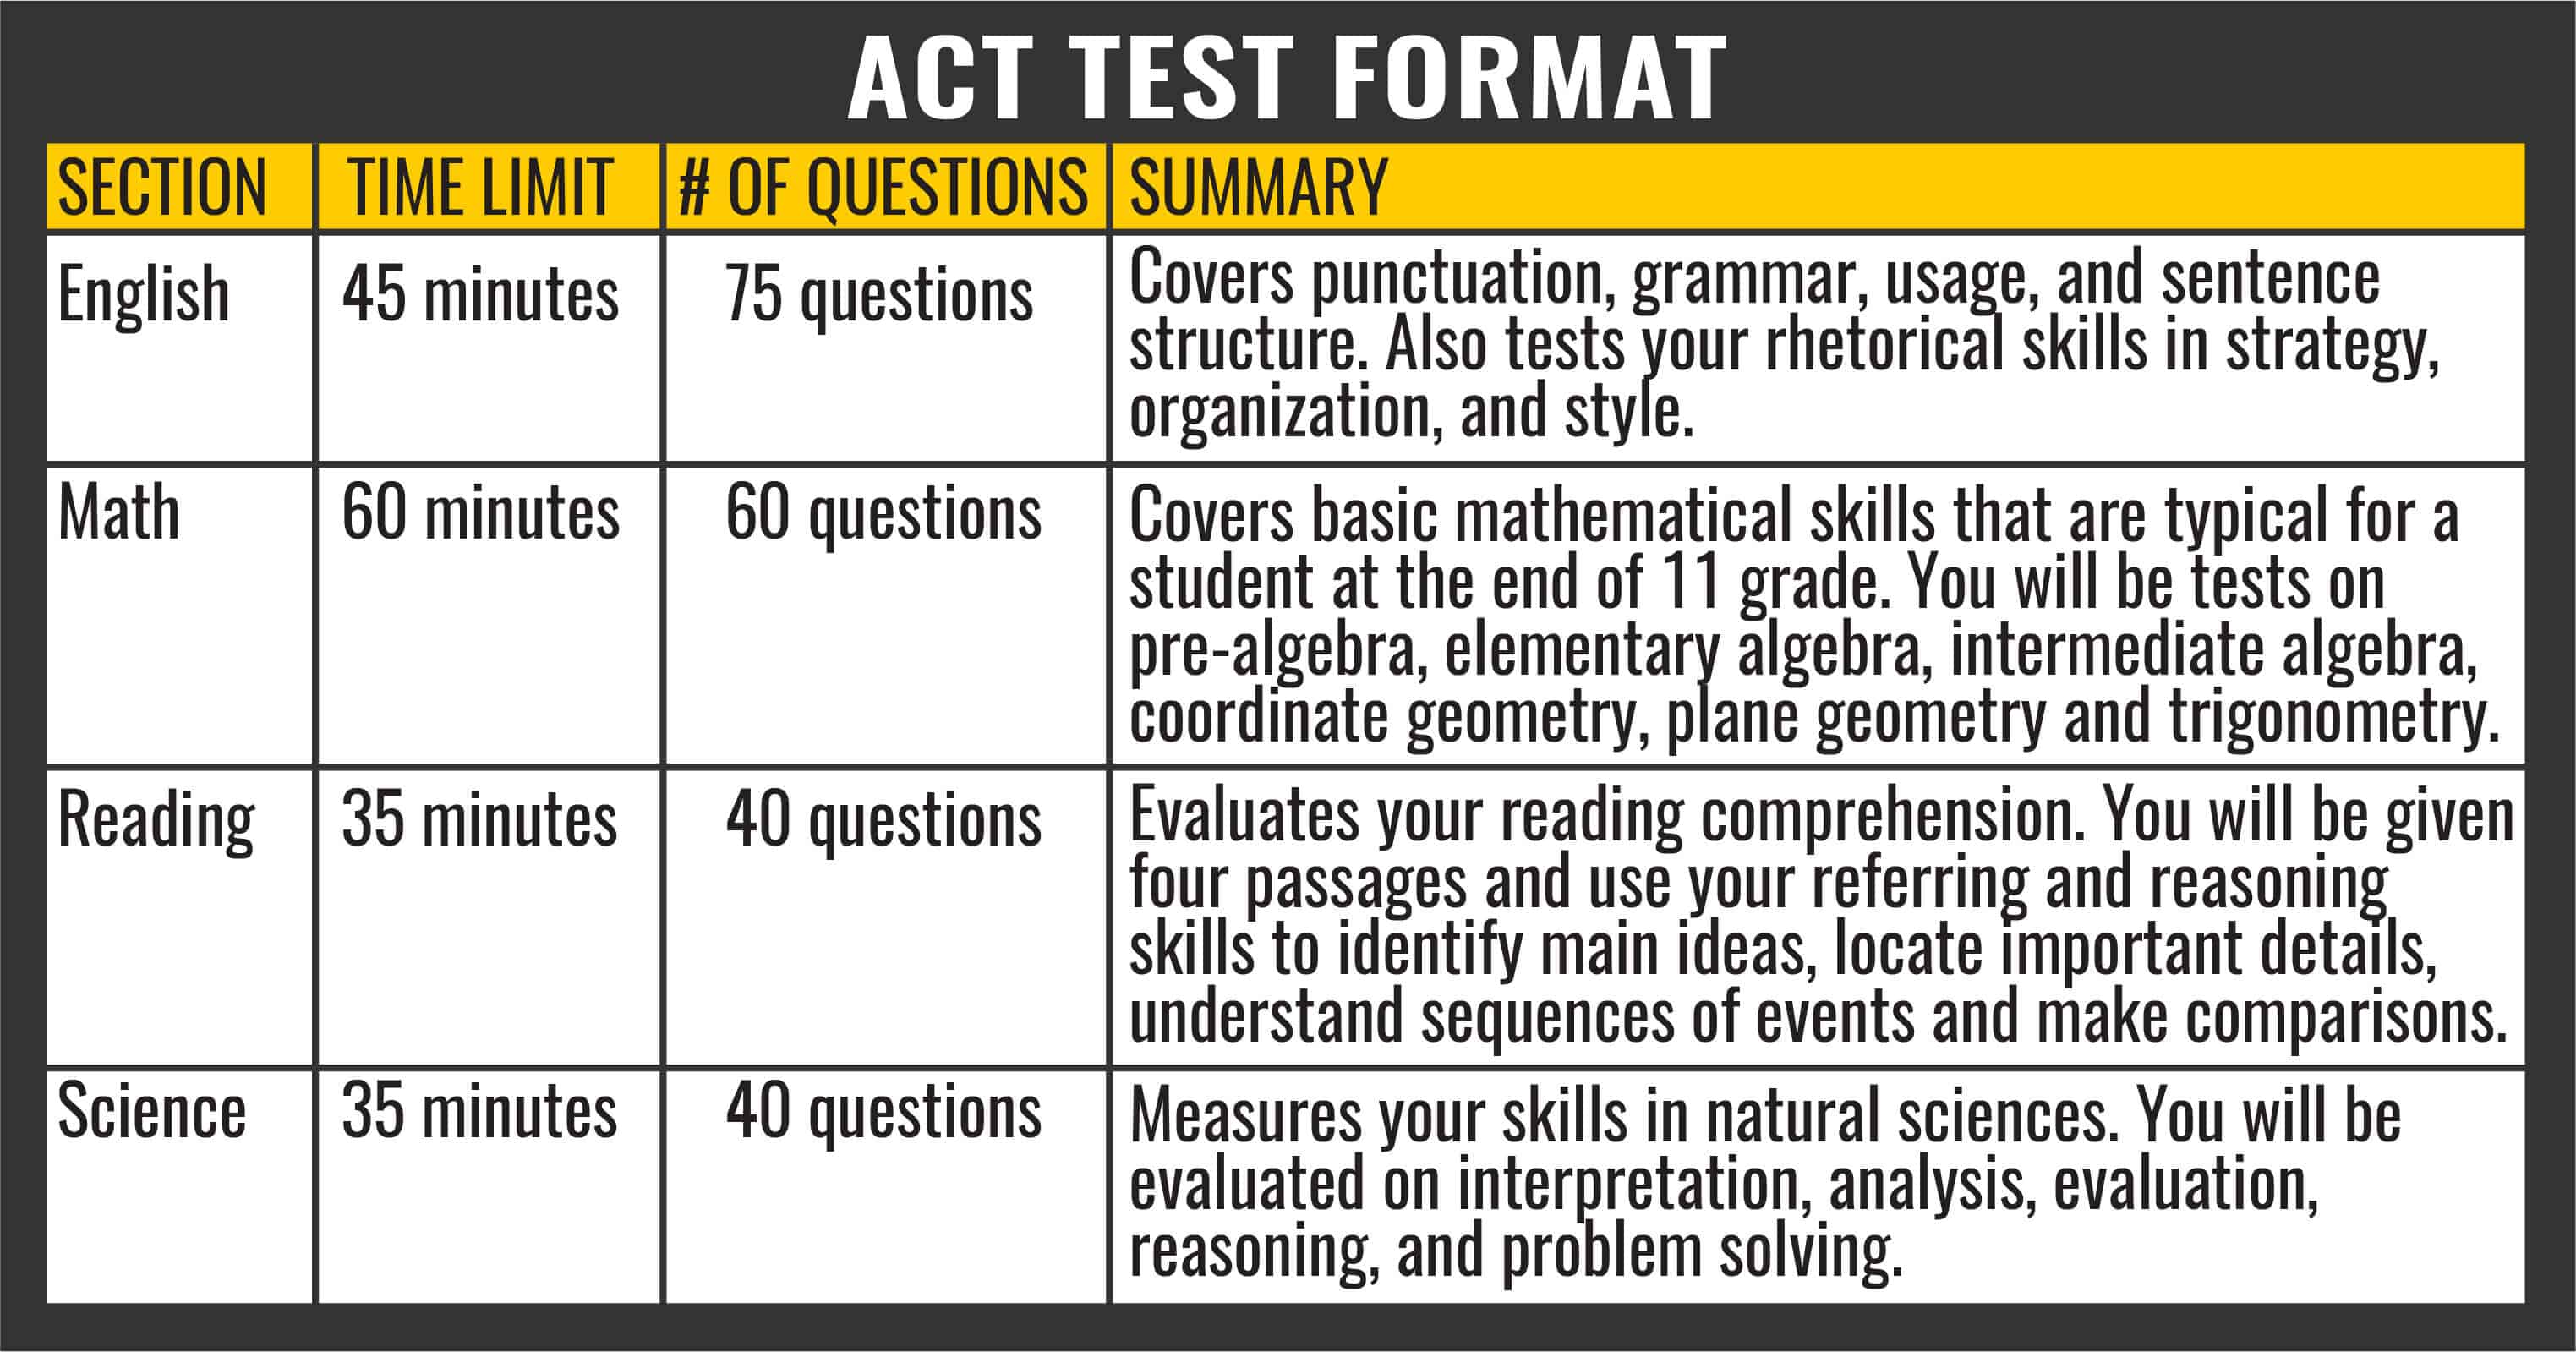 The act test